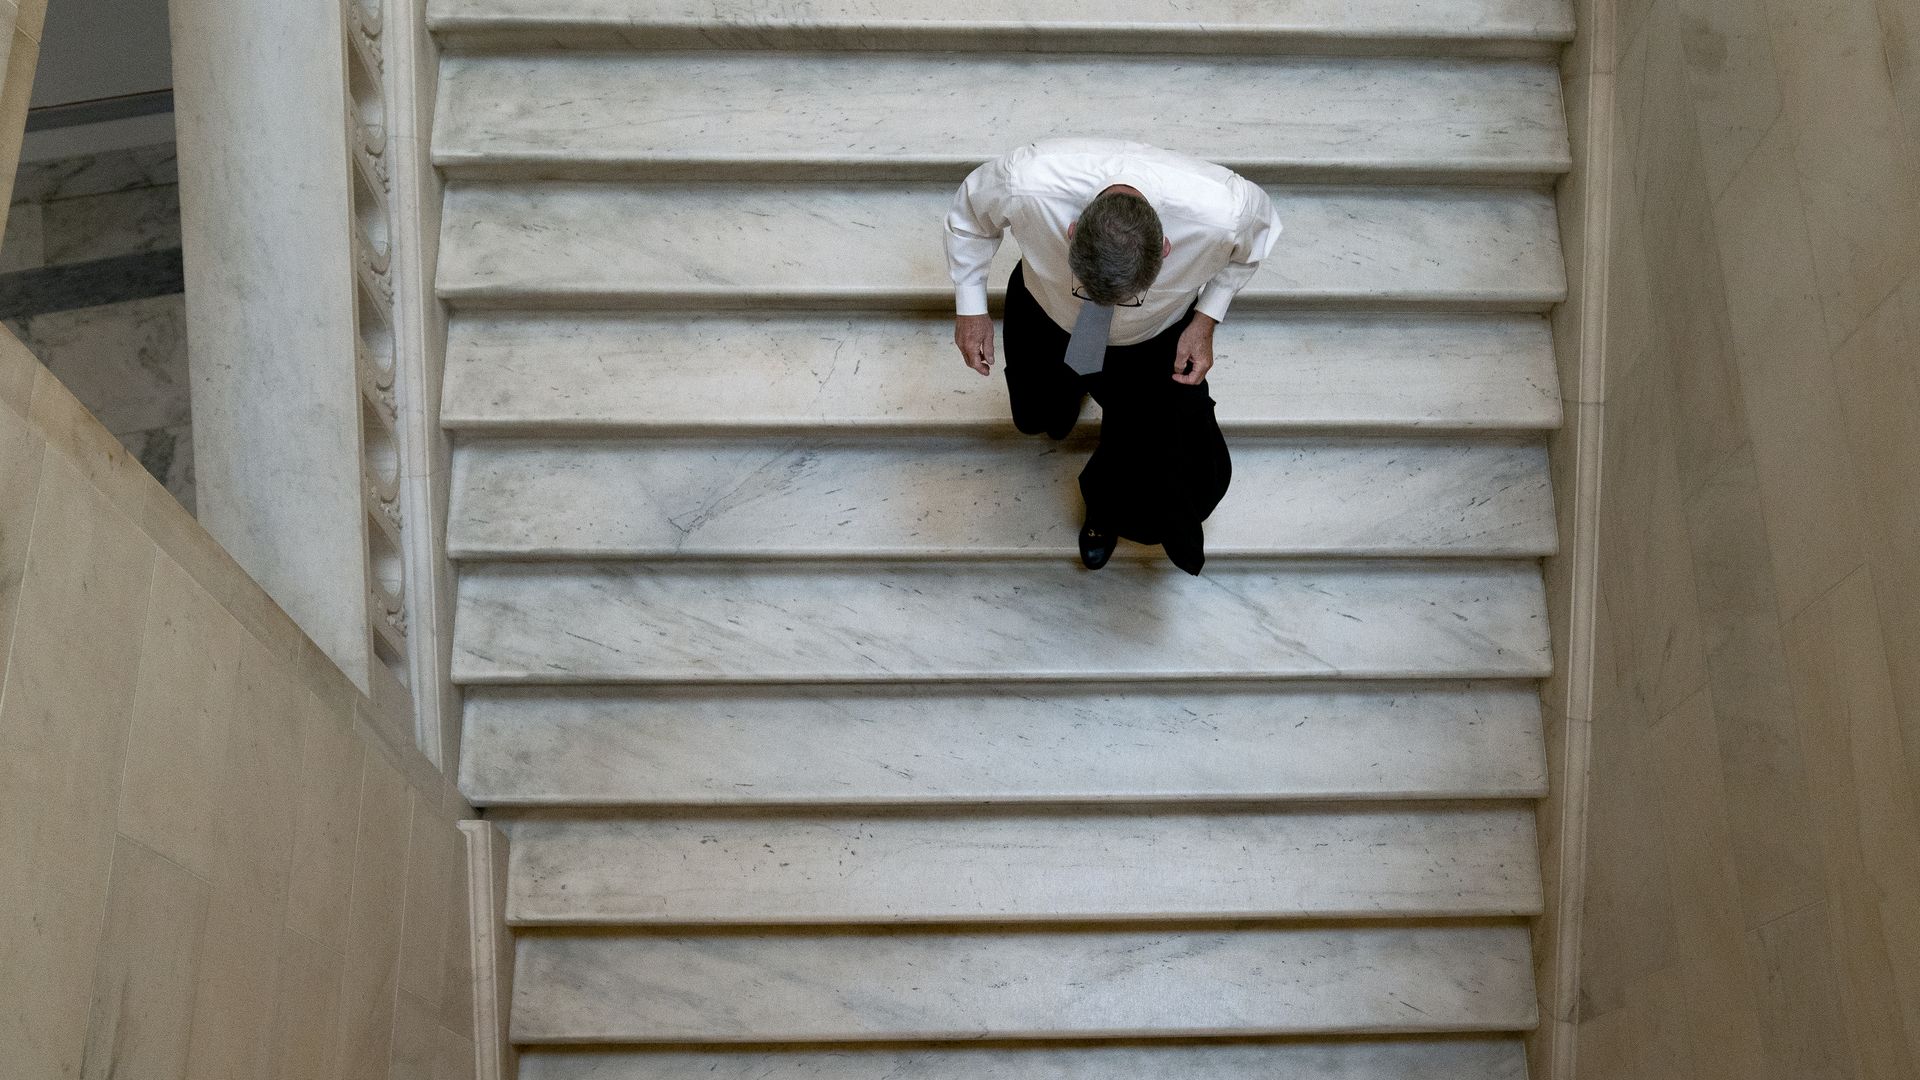 Sen. Richard Burr of North Carolina is seen walking down a set of stairs after leaving a Republican luncheon in the Russell Building.